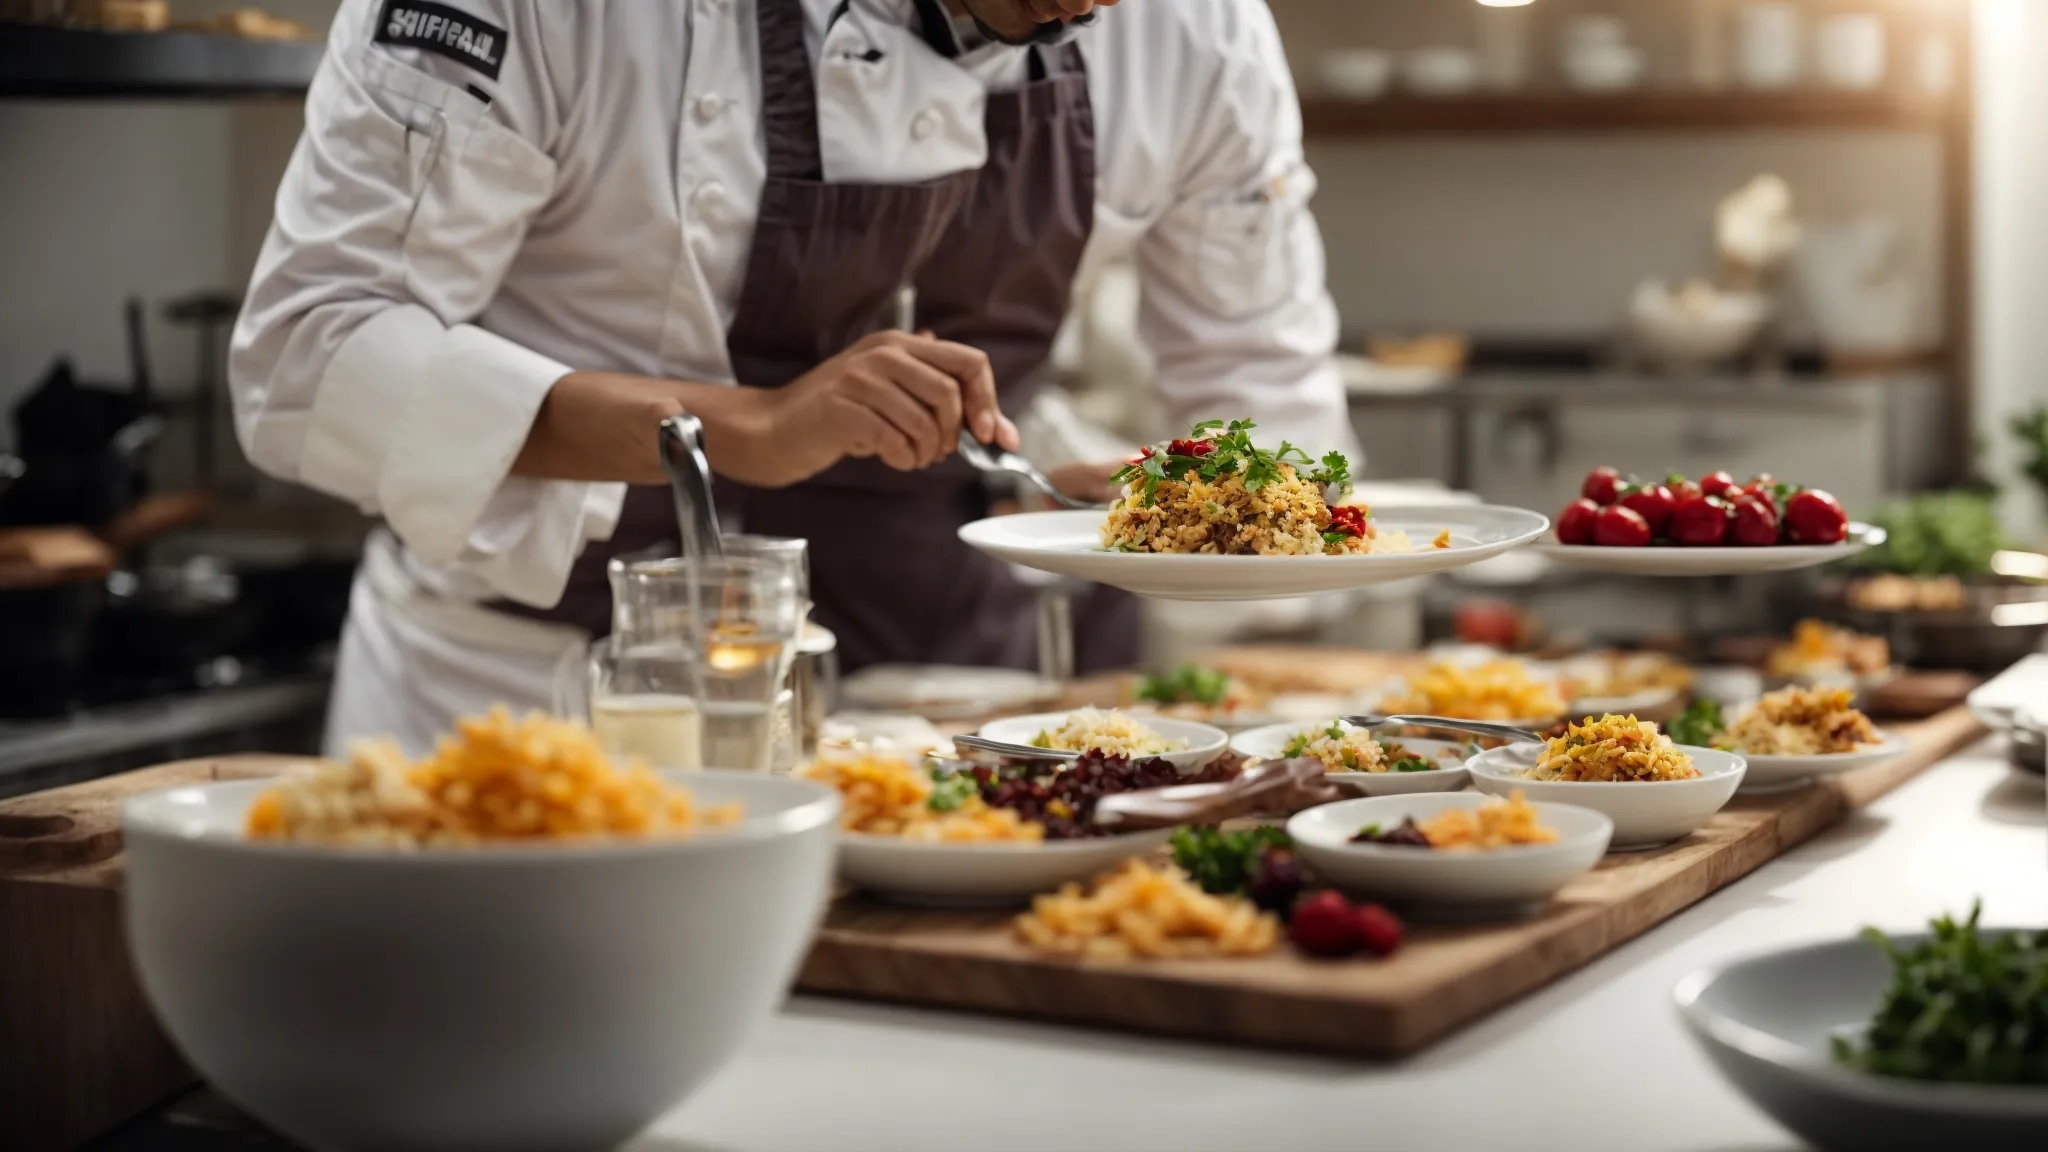 a chef is presenting a beautifully arranged plate of food in a well-lit modern kitchen setting.